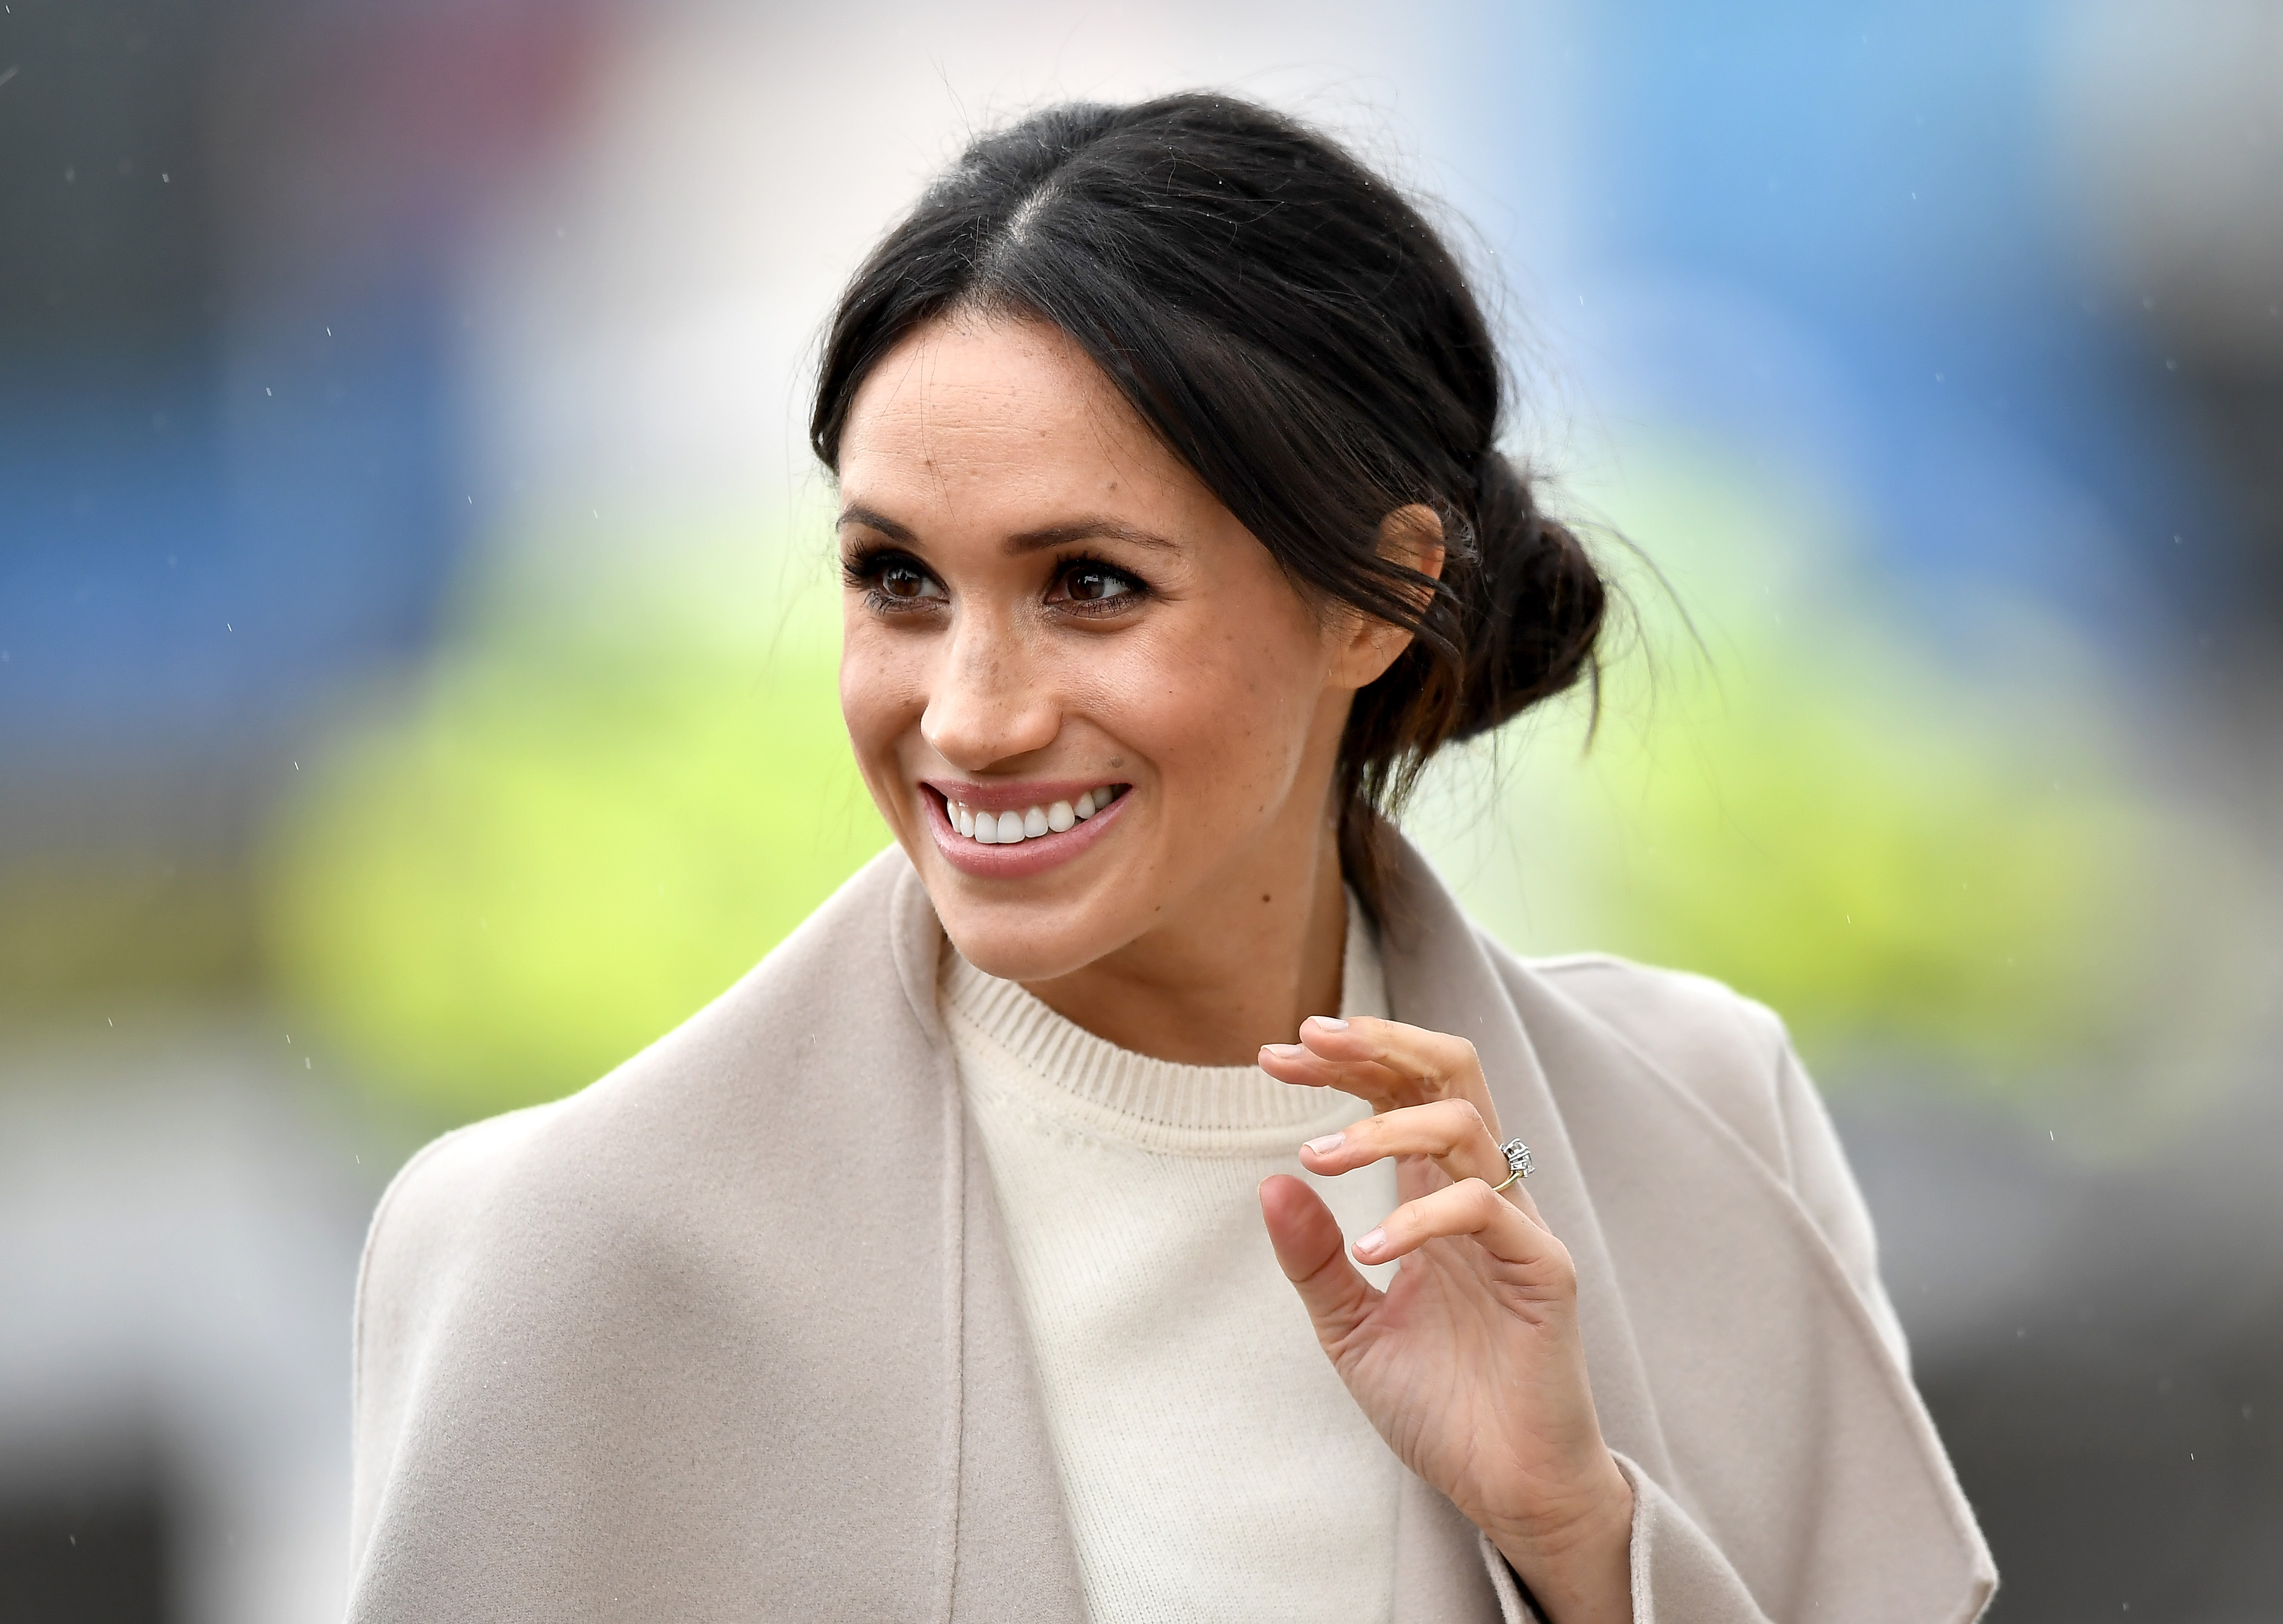 BELFAST, UNITED KINGDOM - MARCH 23:  Meghan Markle is seen ahead of her visit to the iconic Titanic Belfast during her trip with Prince Harry to Northern Ireland on March 23, 2018 in Belfast, Northern Ireland, United Kingdom.  (Photo by Charles McQuillan/Getty Images) (Charles McQuillan&mdash;Getty Images)